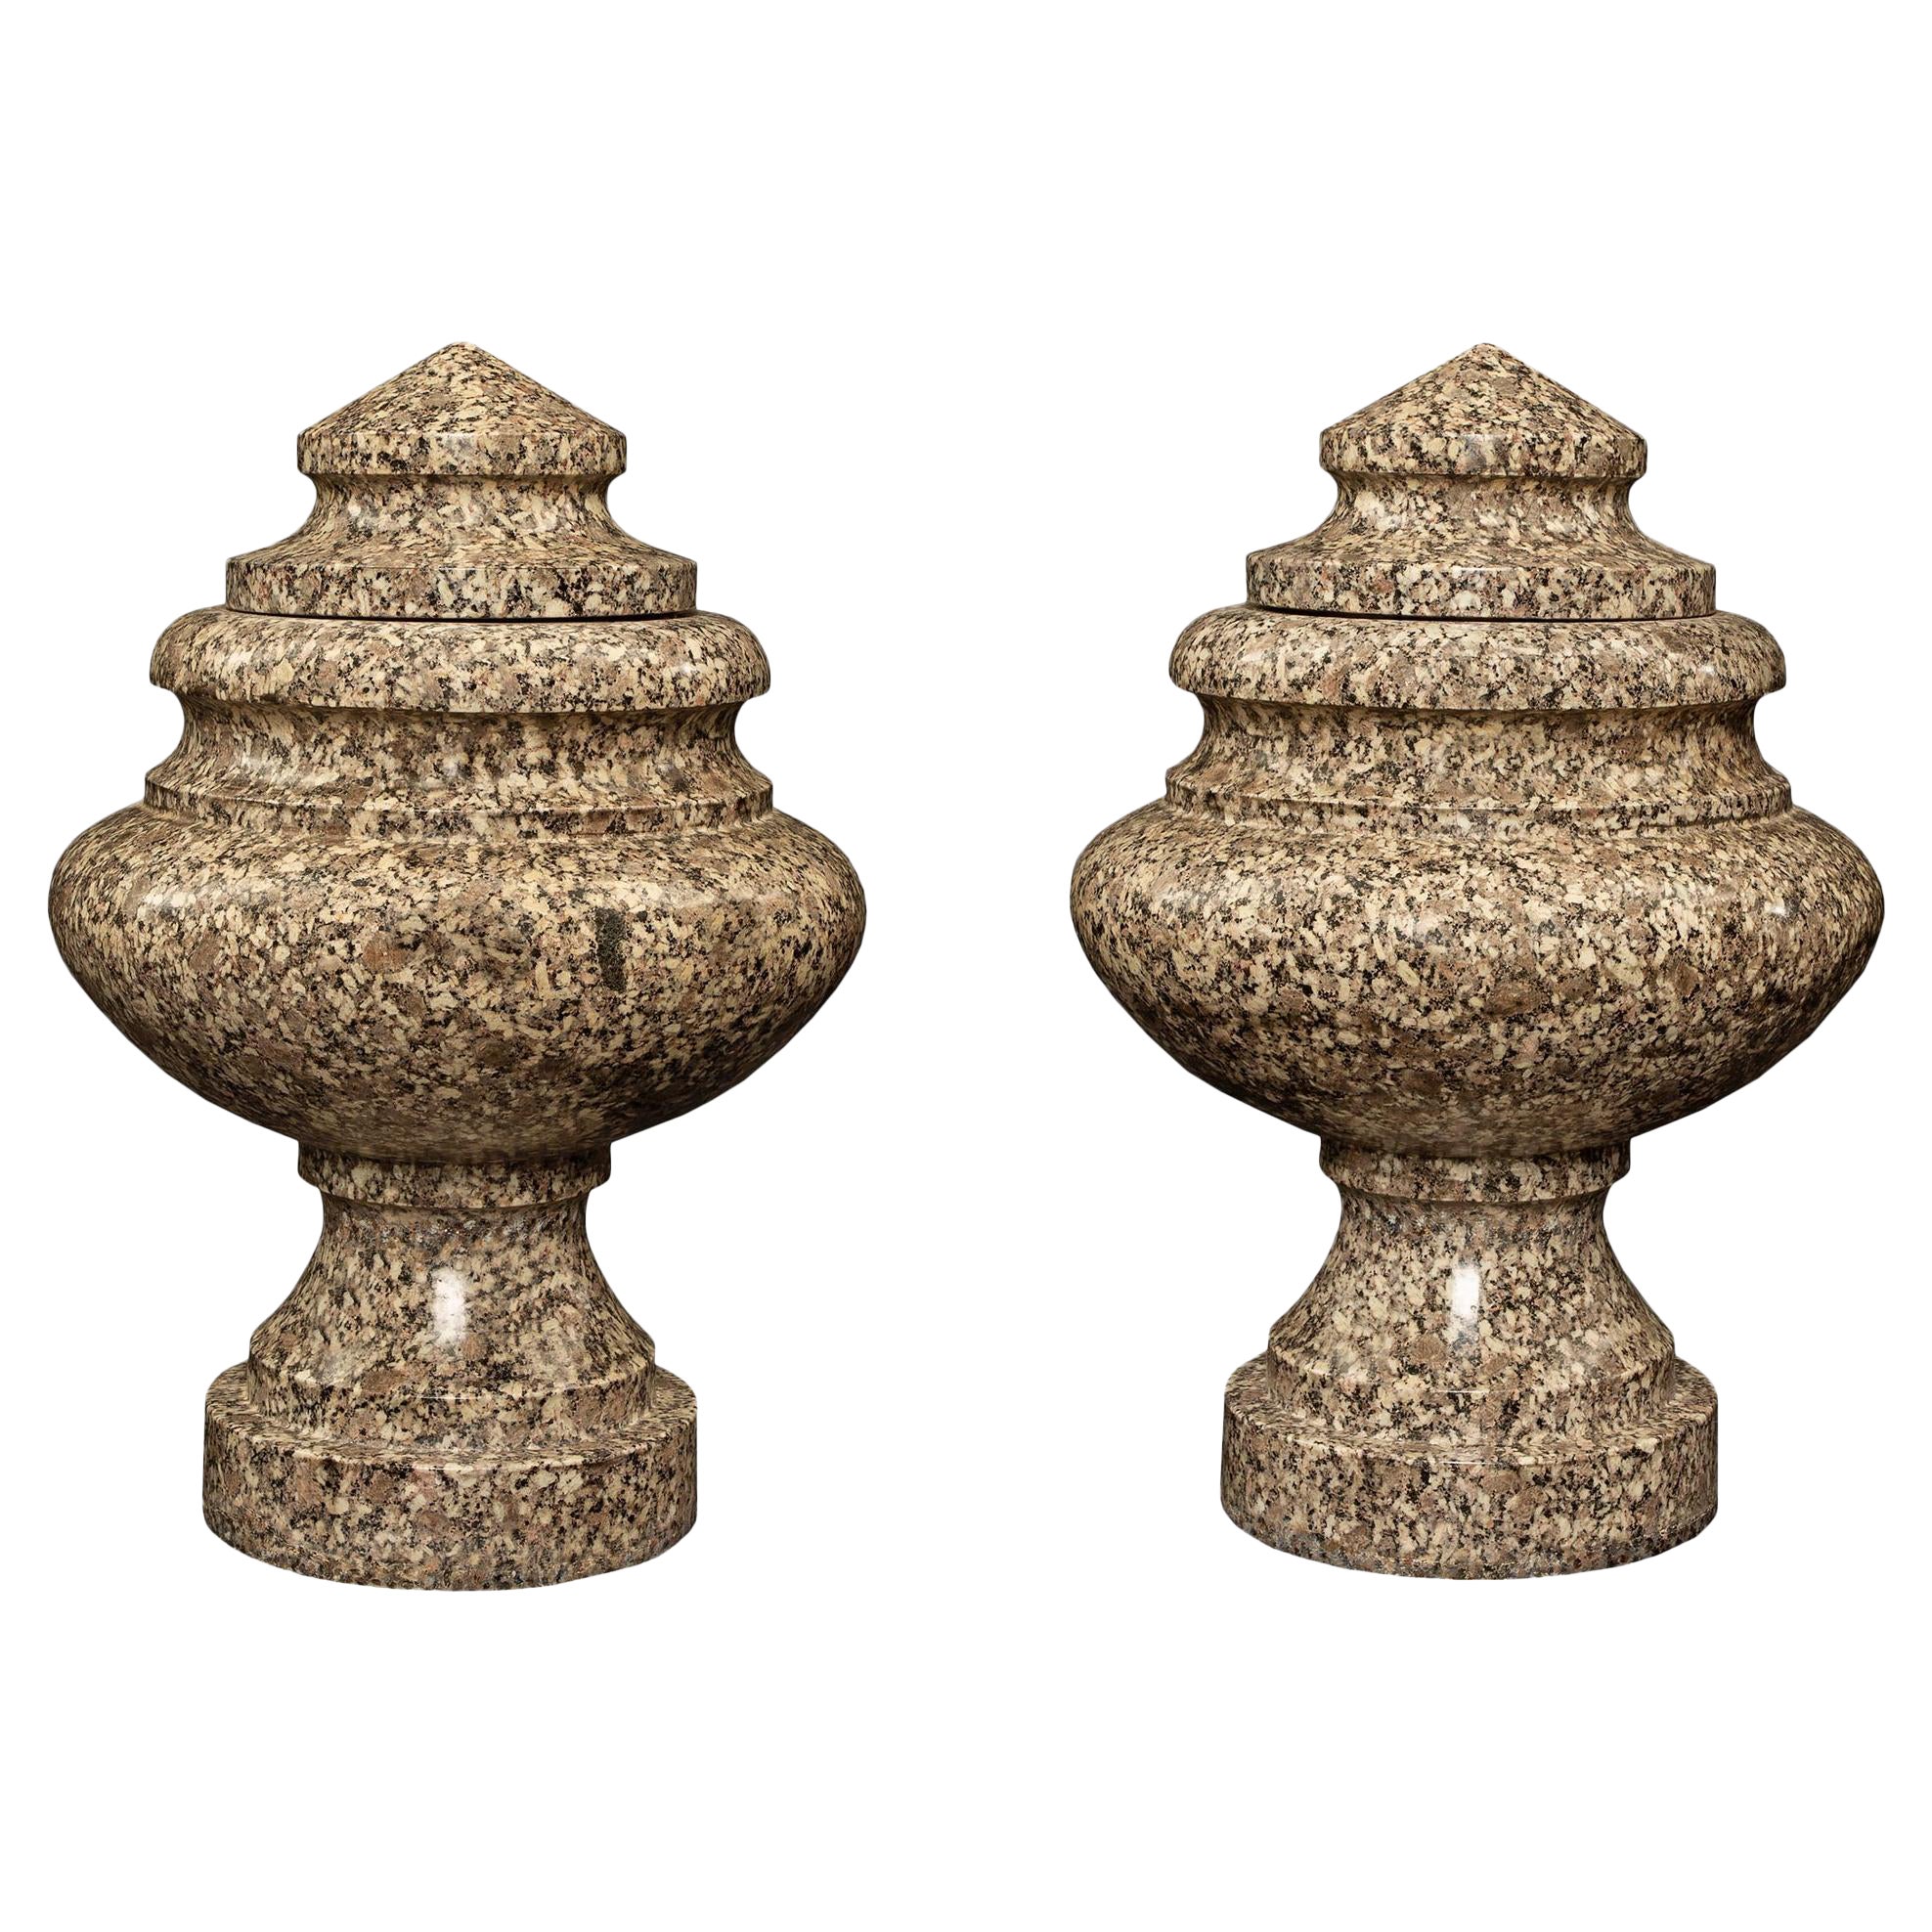 Pair of Italian 19th Century Neoclassical Style Granite Lidded Urns For Sale